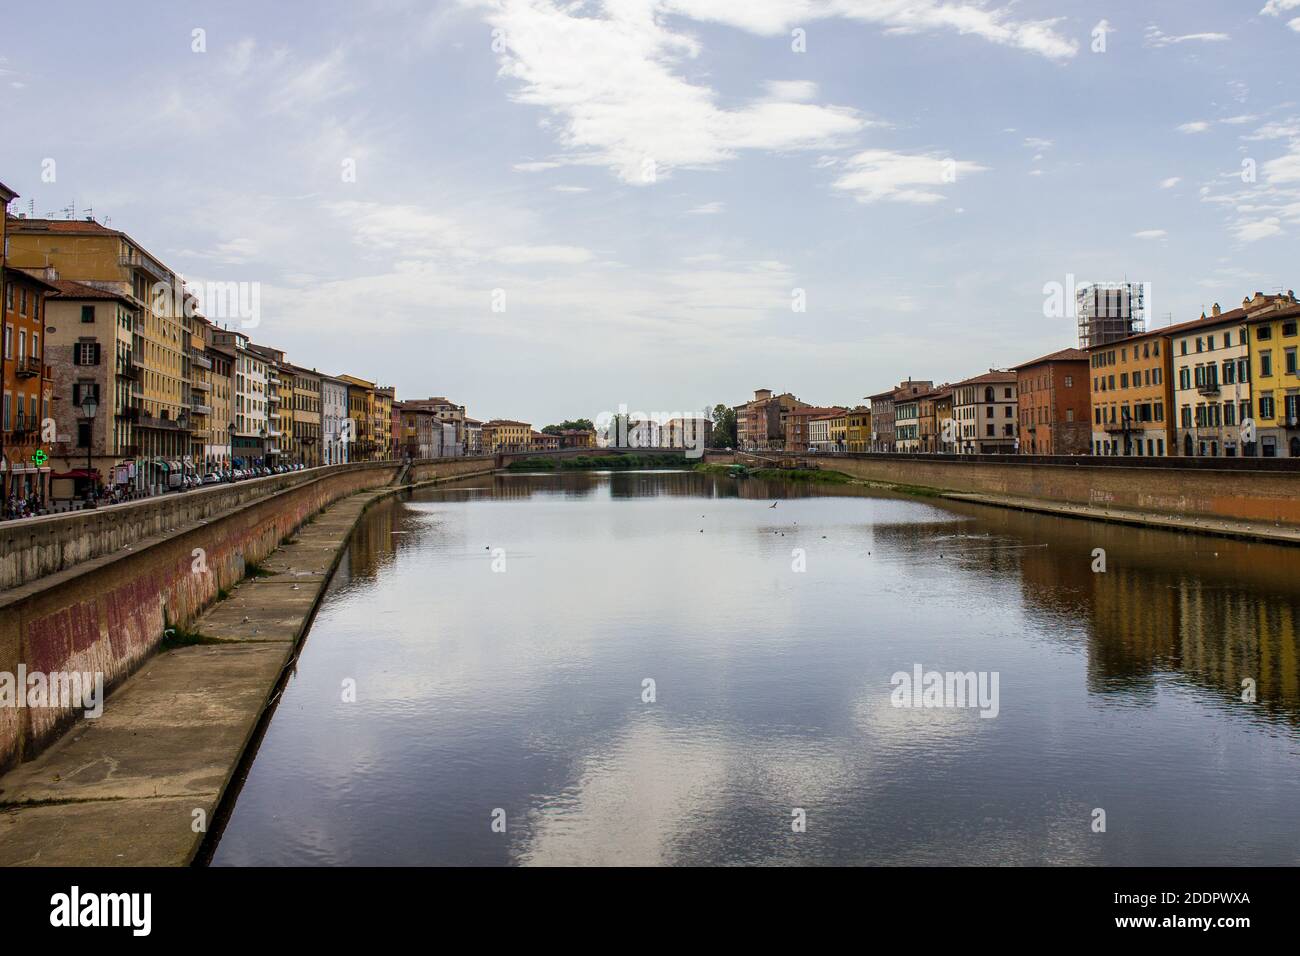 Pisa, Italy - July 9, 2017: View of People Walking along Arno River on a Summer Day Stock Photo